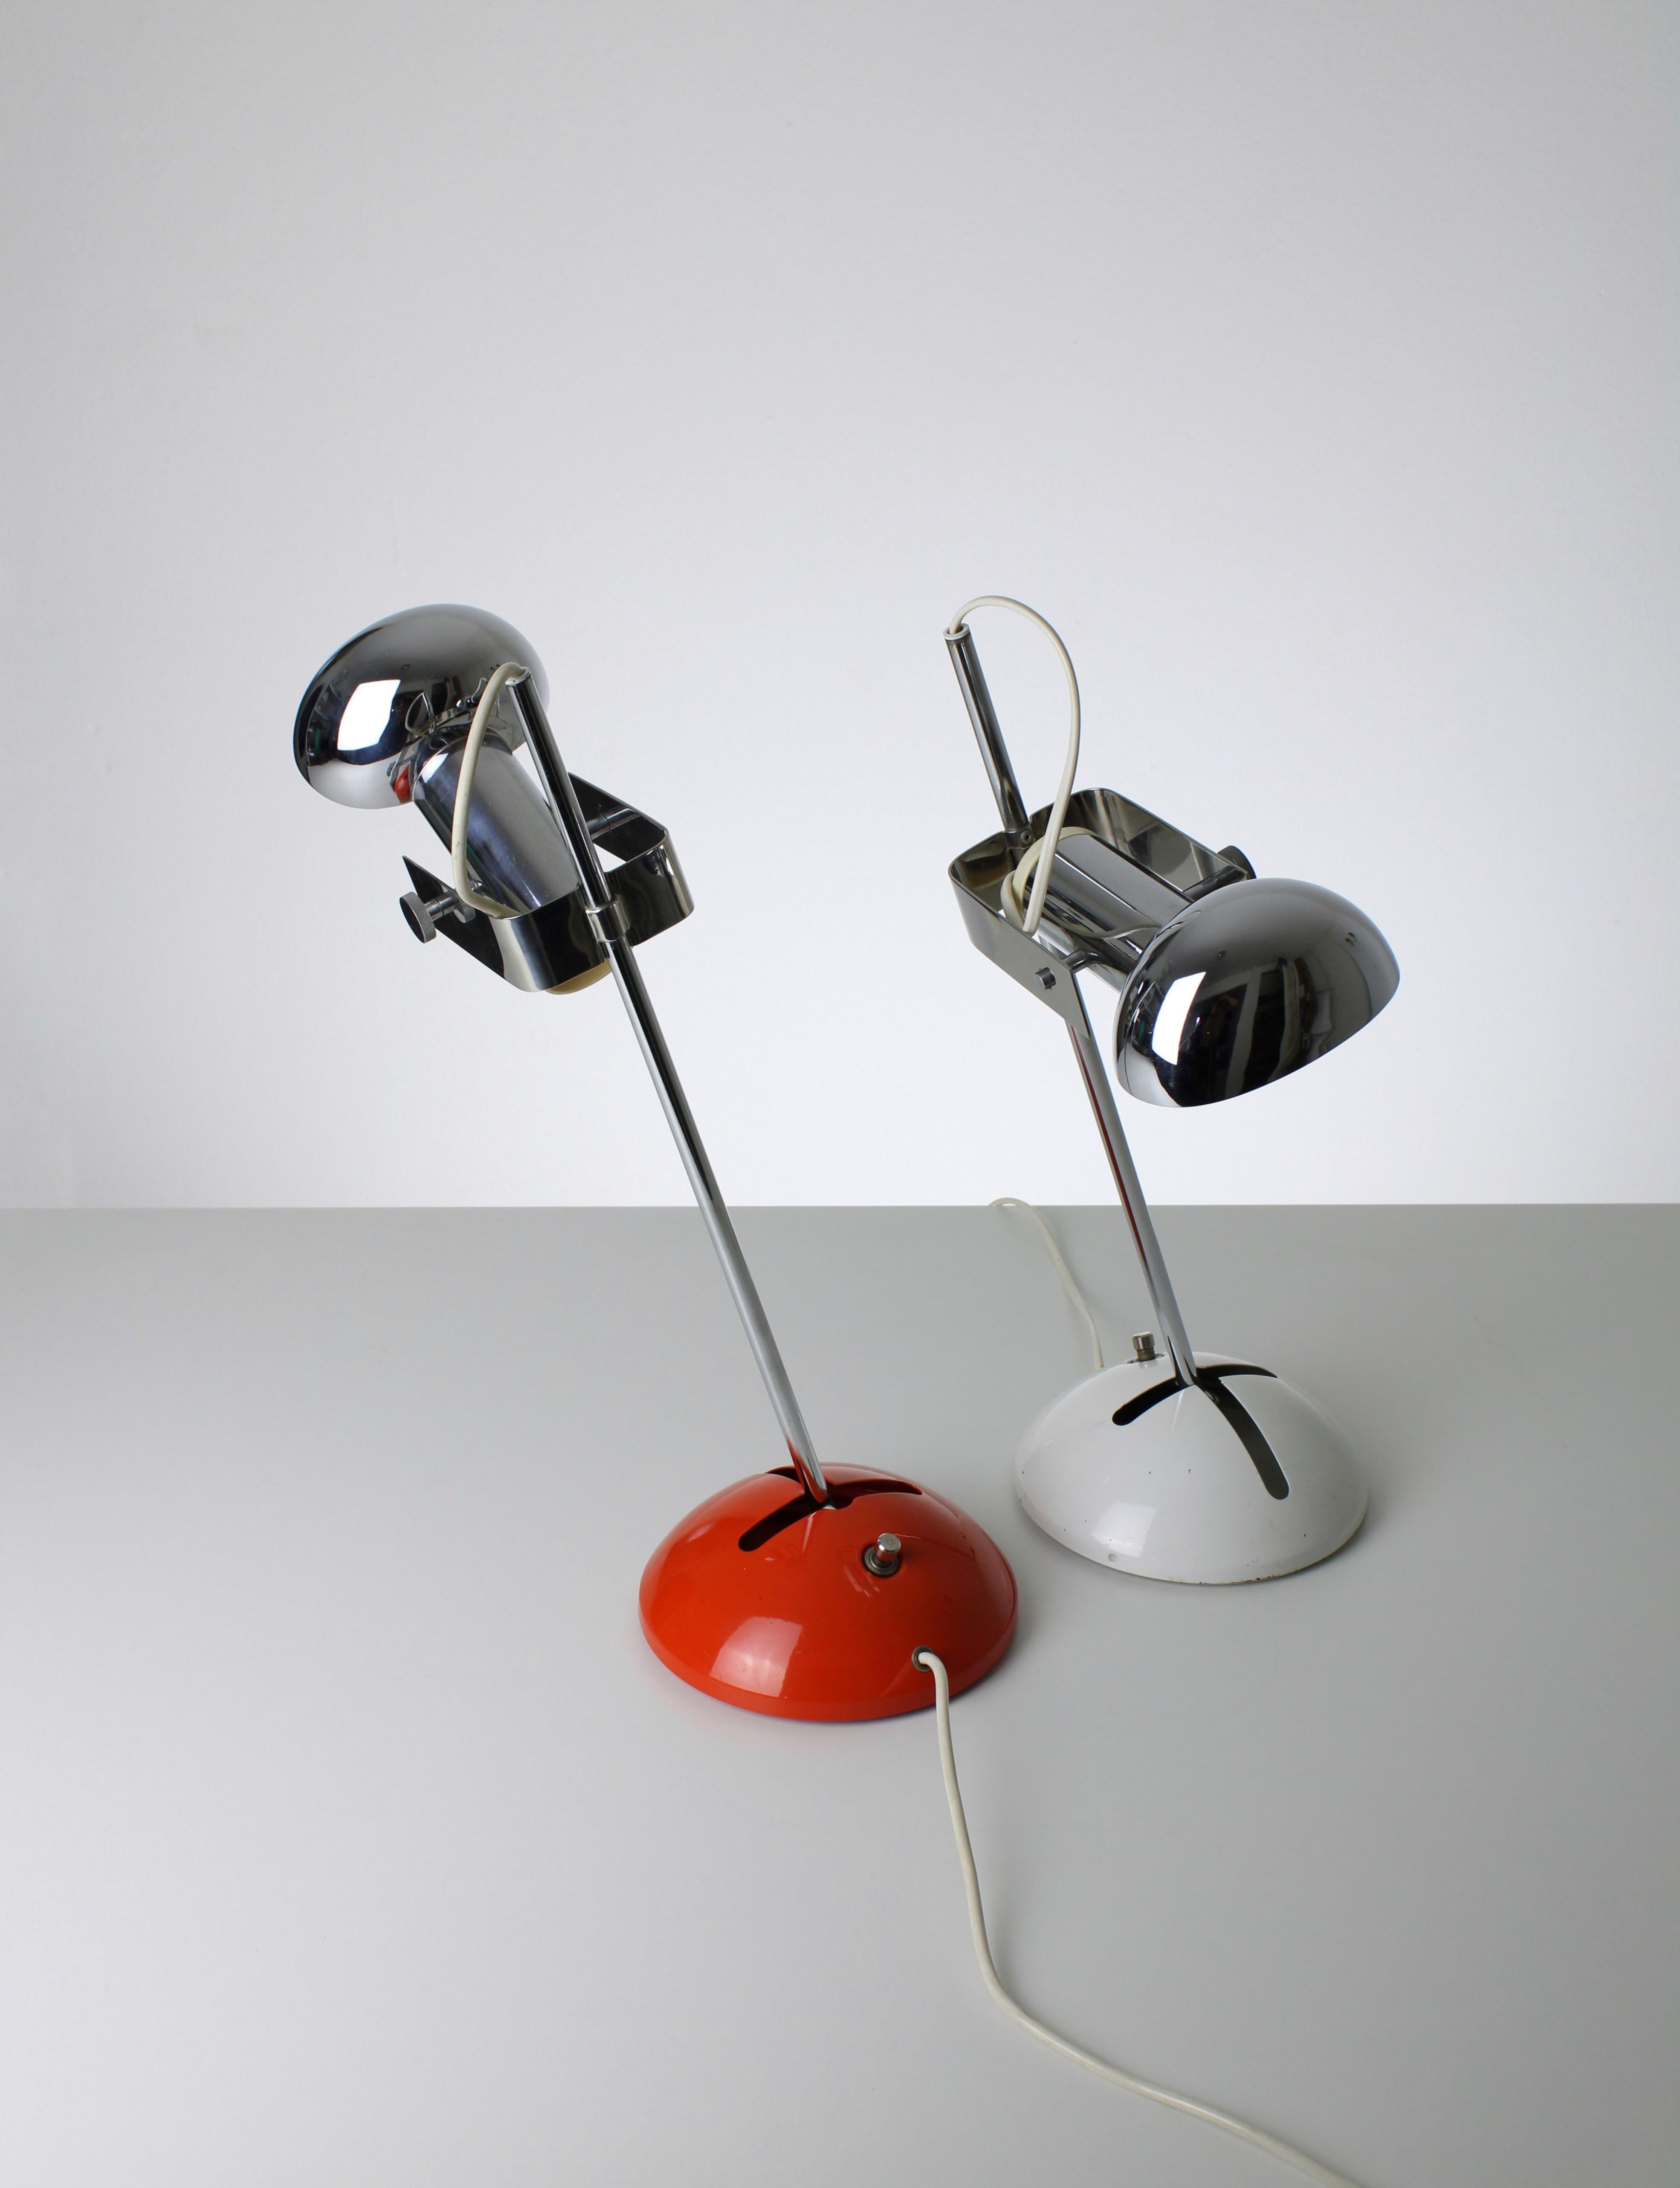 Set of two identical T359 desk lamps designed by Robert Sonneman for Luci Cinicello Milano in the 1970s. These lamps are adjustable in many ways and therefore very user-friendly. They feature a lacquered aluminum base, chrome parts and a custom